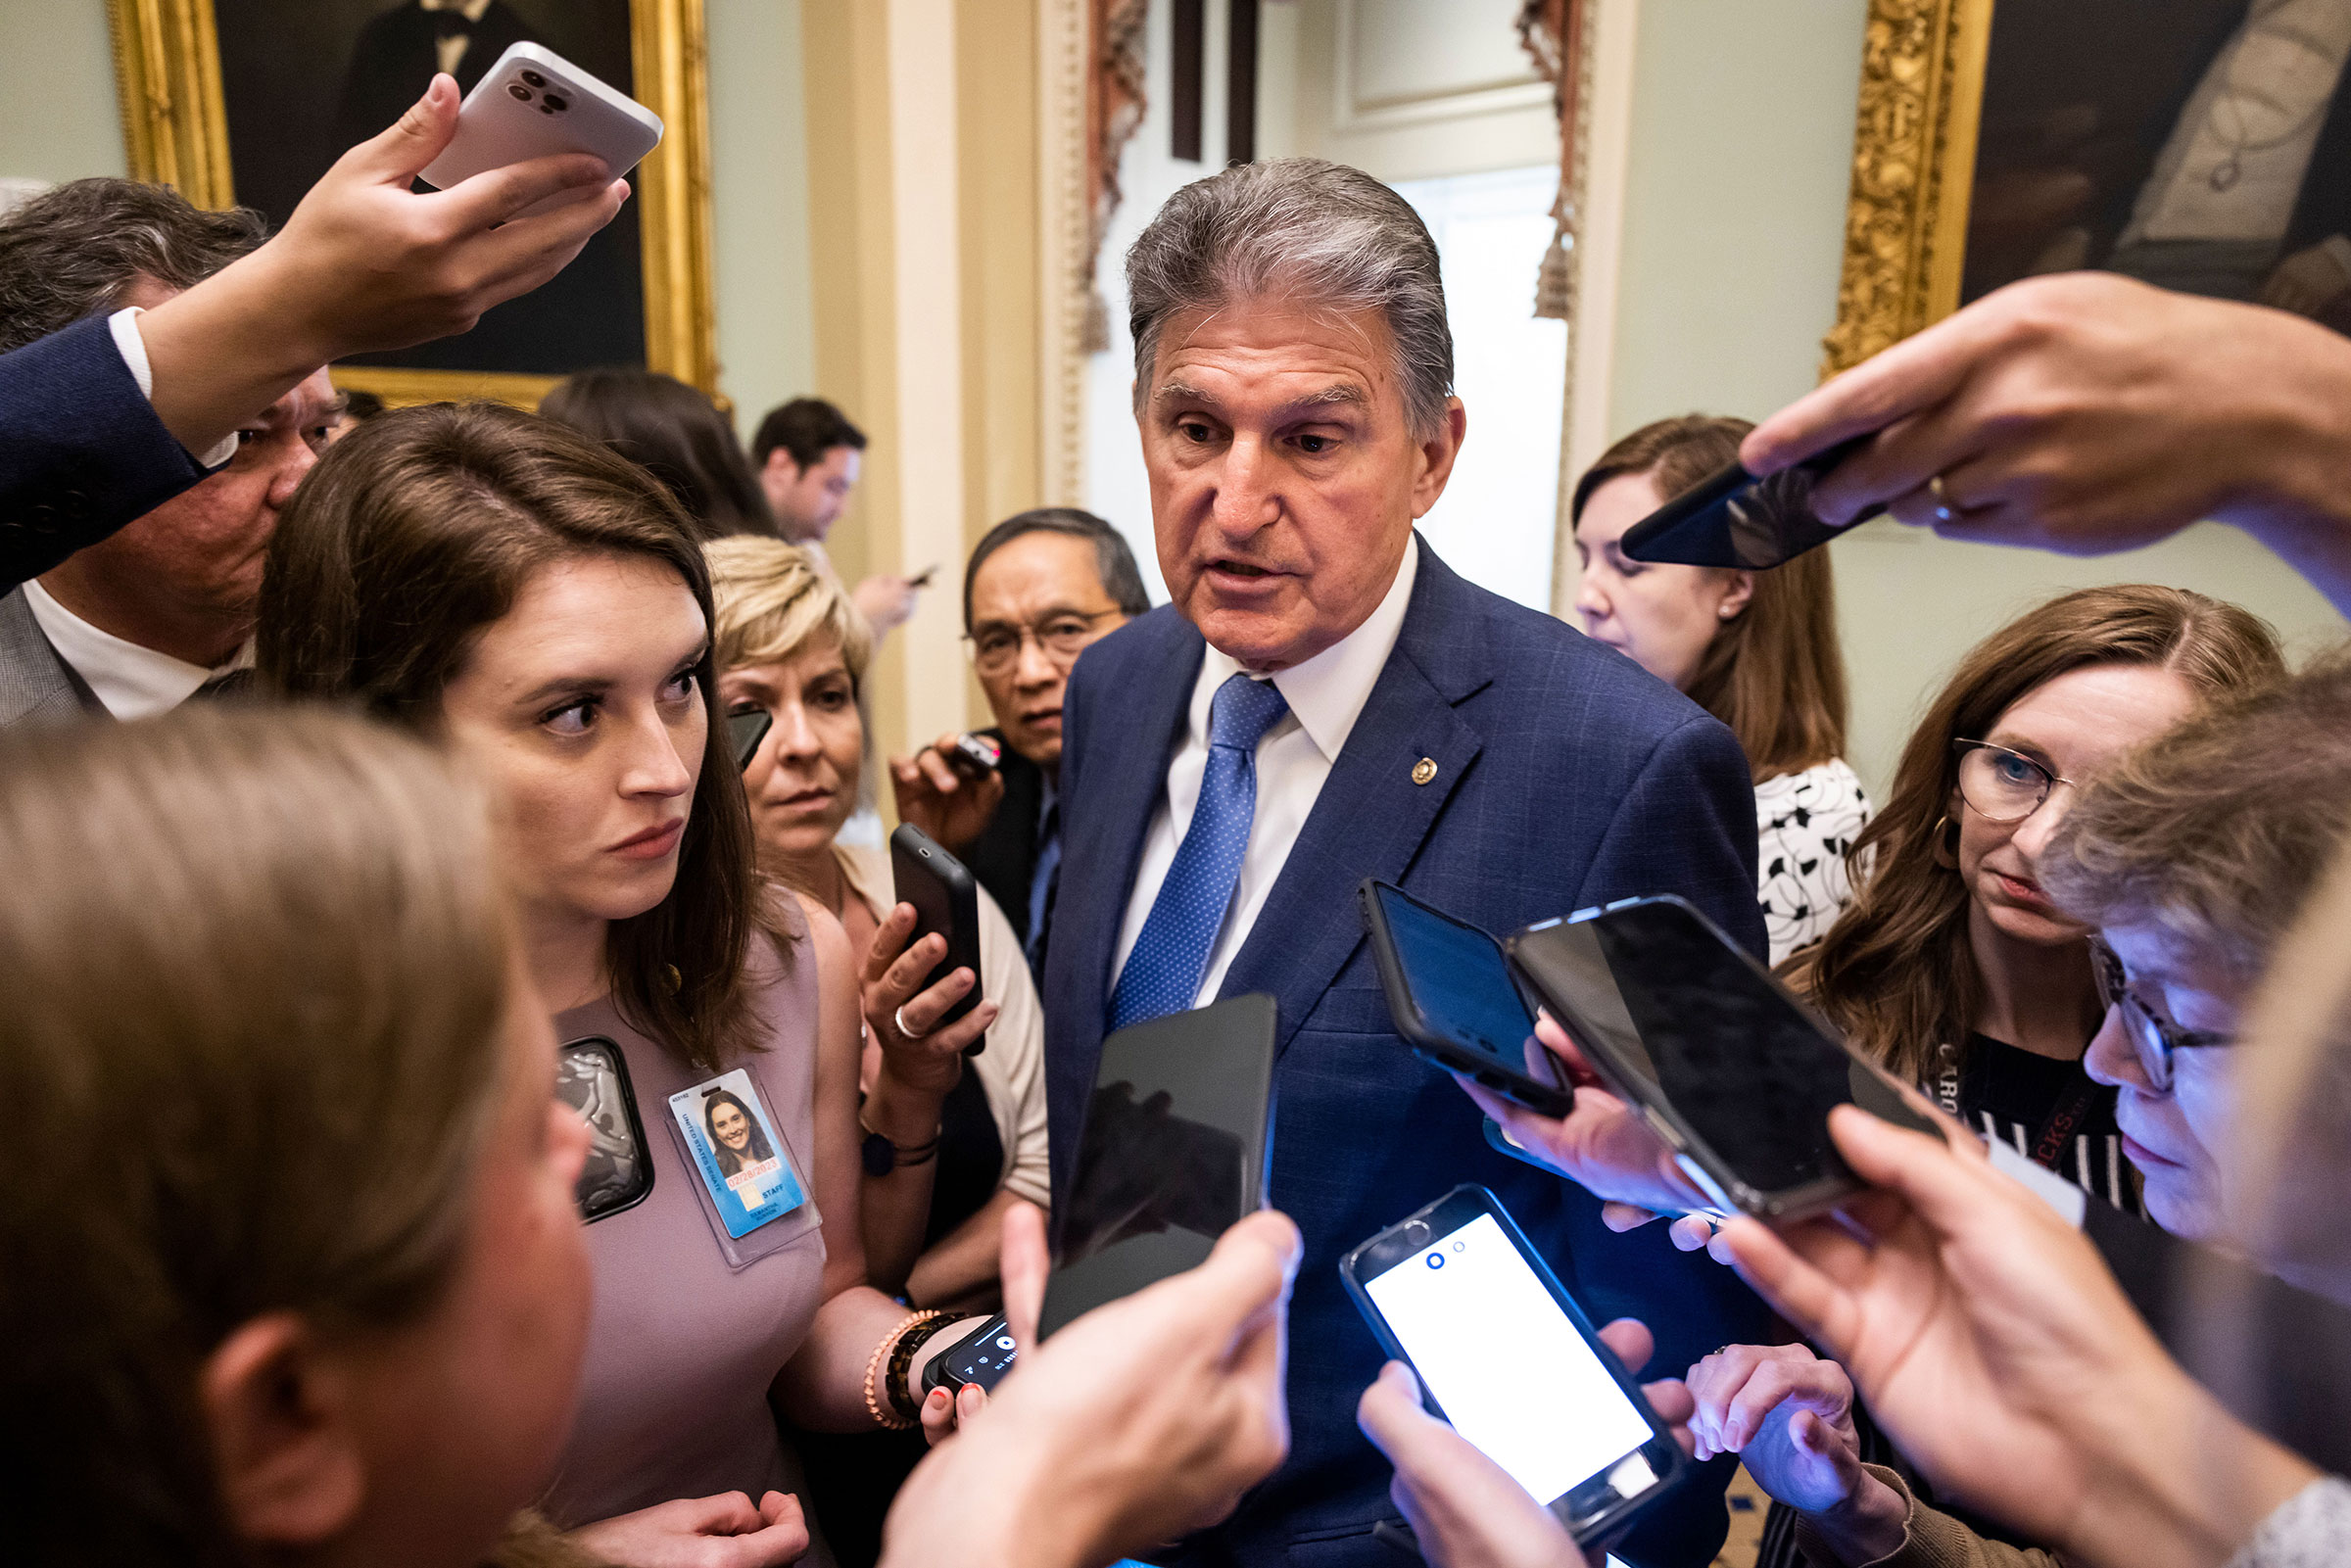 Democratic Senator from West Virginia Joe Manchin speaks to reporters after President Joe Biden met with lawmakers seeking their support for his two-bill approach to infrastructure spending in the Capitol in Washington, on July 14, 2021. (Jim Lo Scalzo—EPA-EFE/Shutterstock)